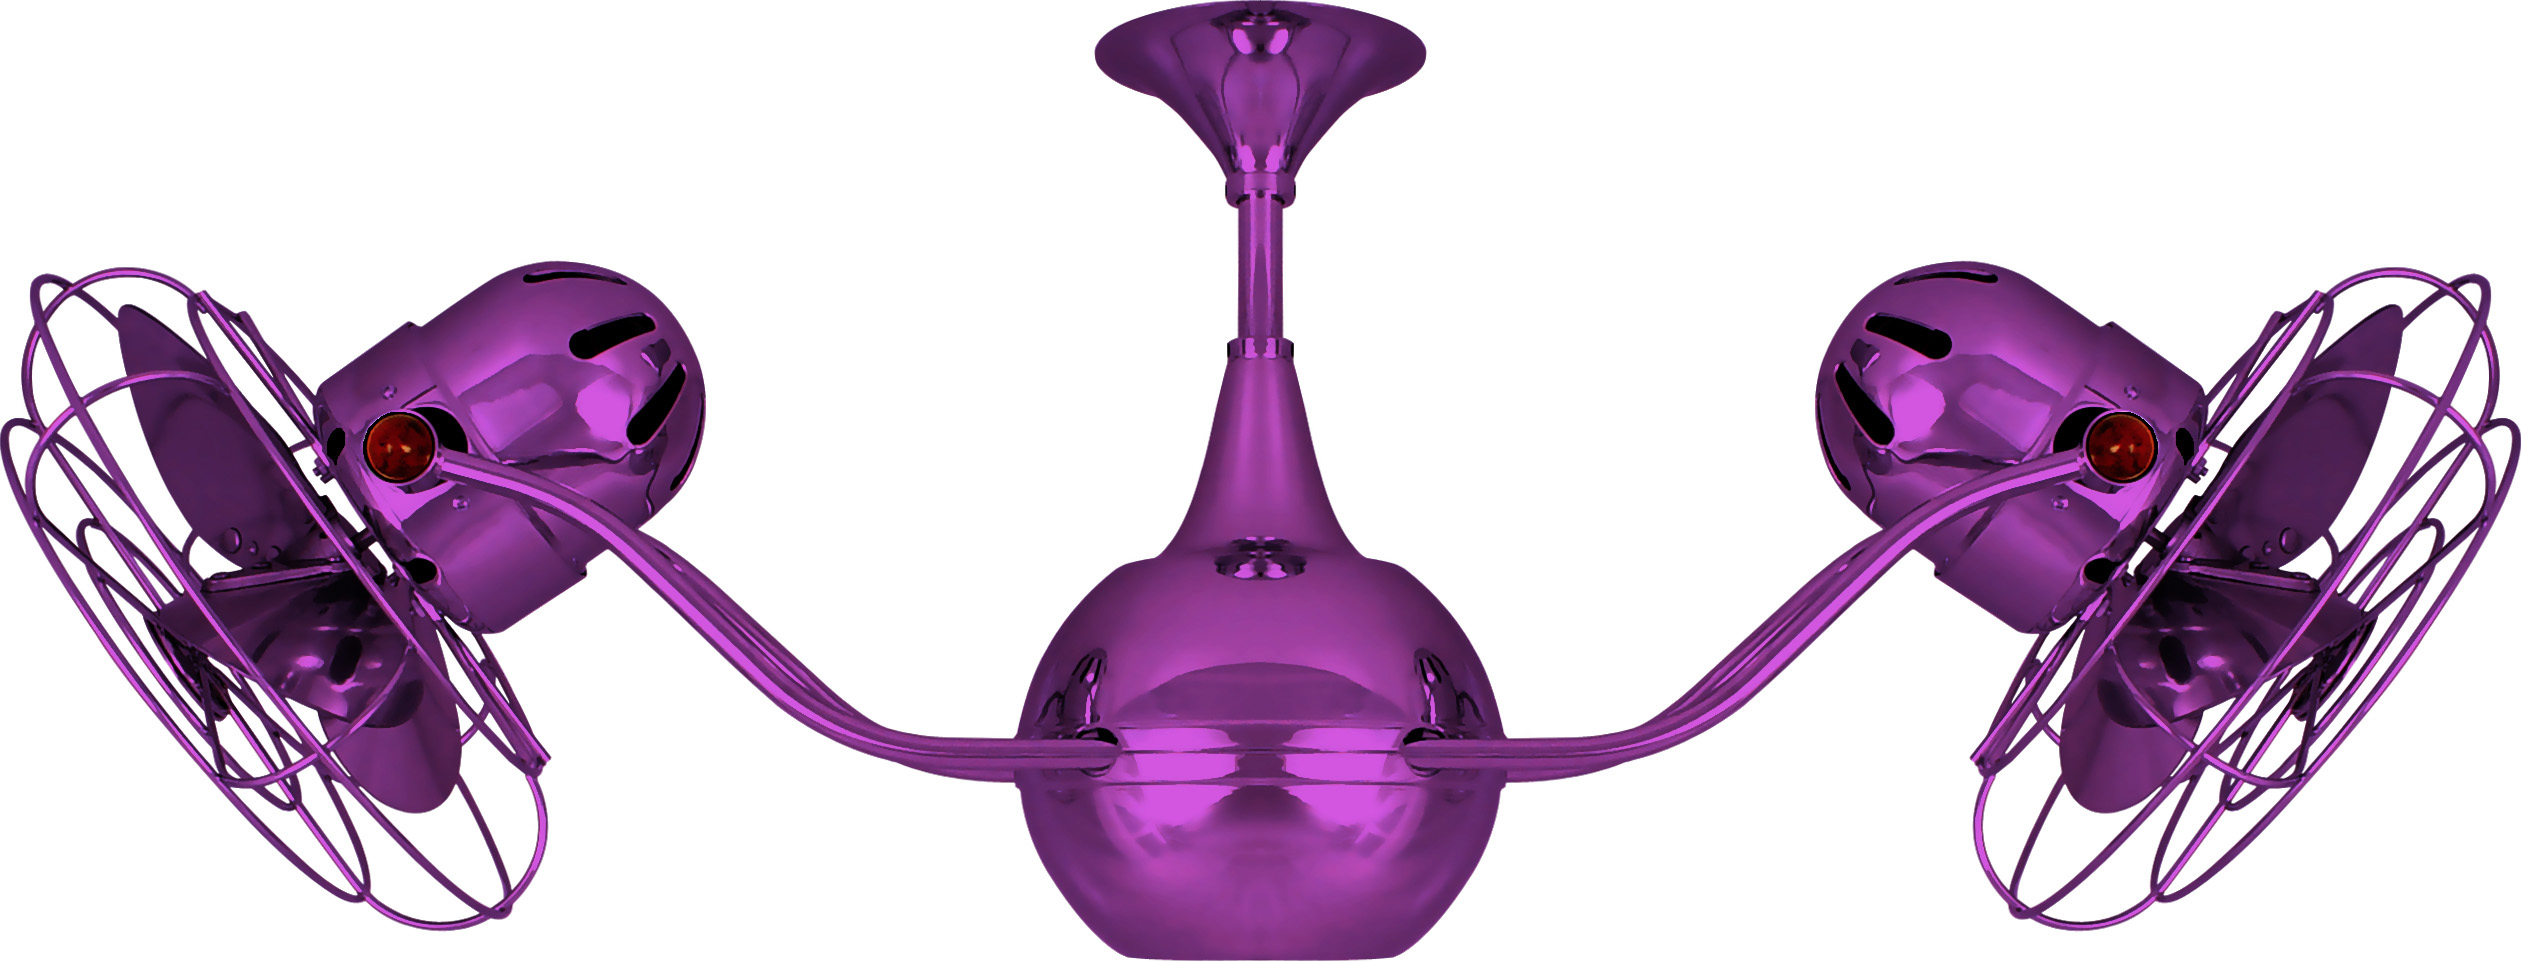 Vent-Bettina Rotational Dual Head Ceiling Fan in Ametista / Light Purple Finish with Metal Blades and Decorative Cage